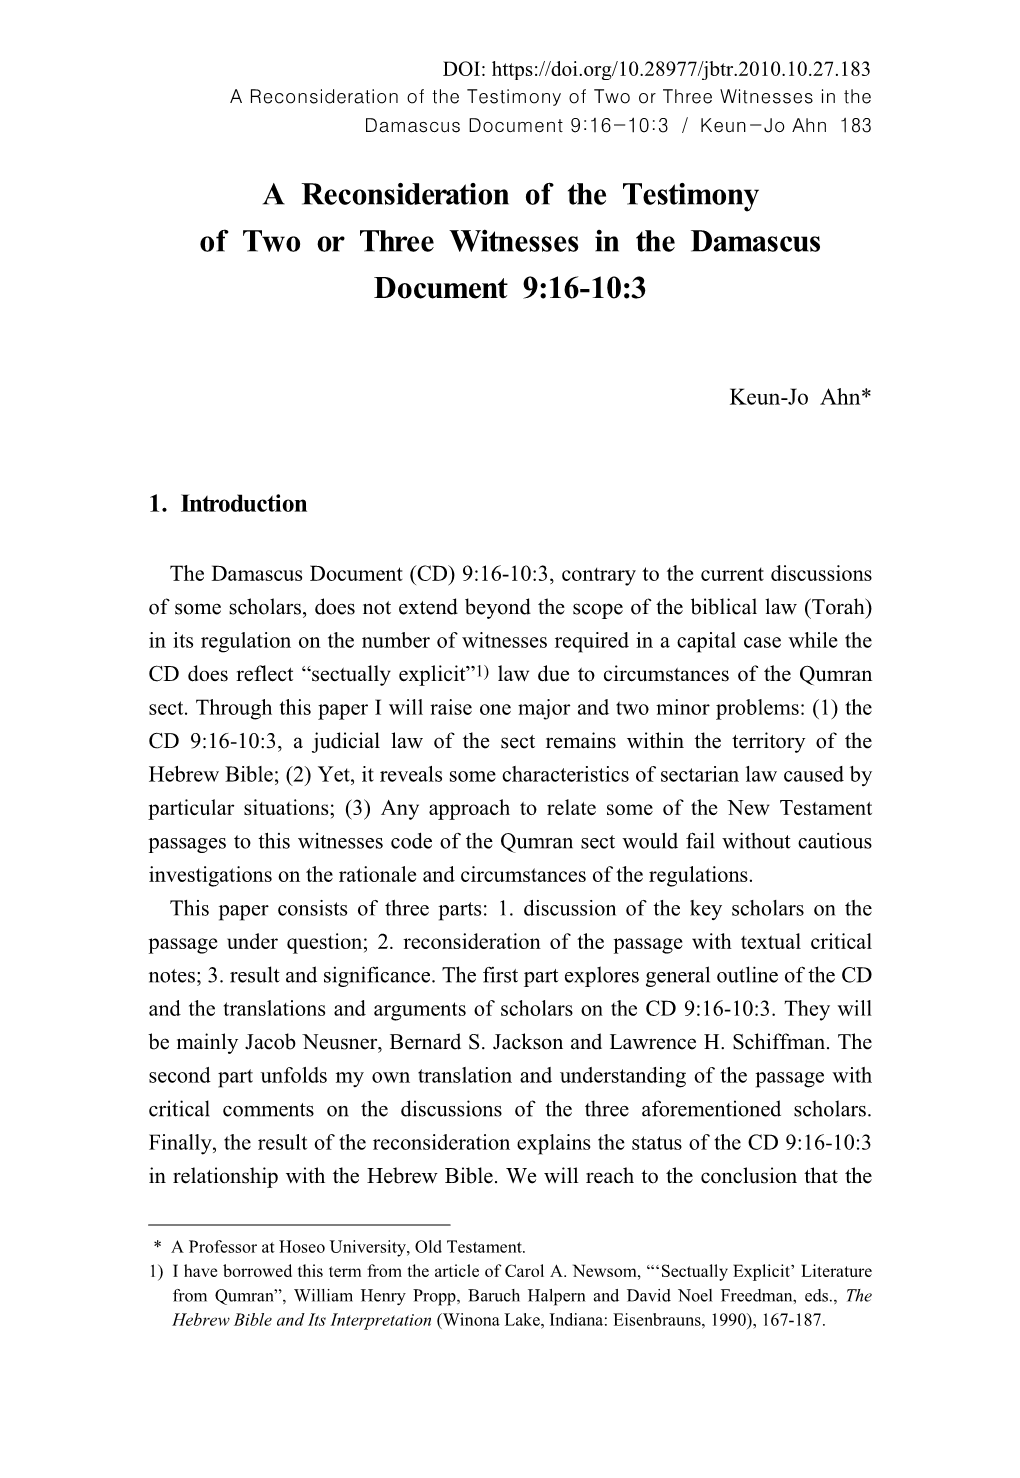 A Reconsideration of the Testimony of Two Or Three Witnesses in the Damascus Document 9:16-10:3 / Keun-Jo Ahn 183